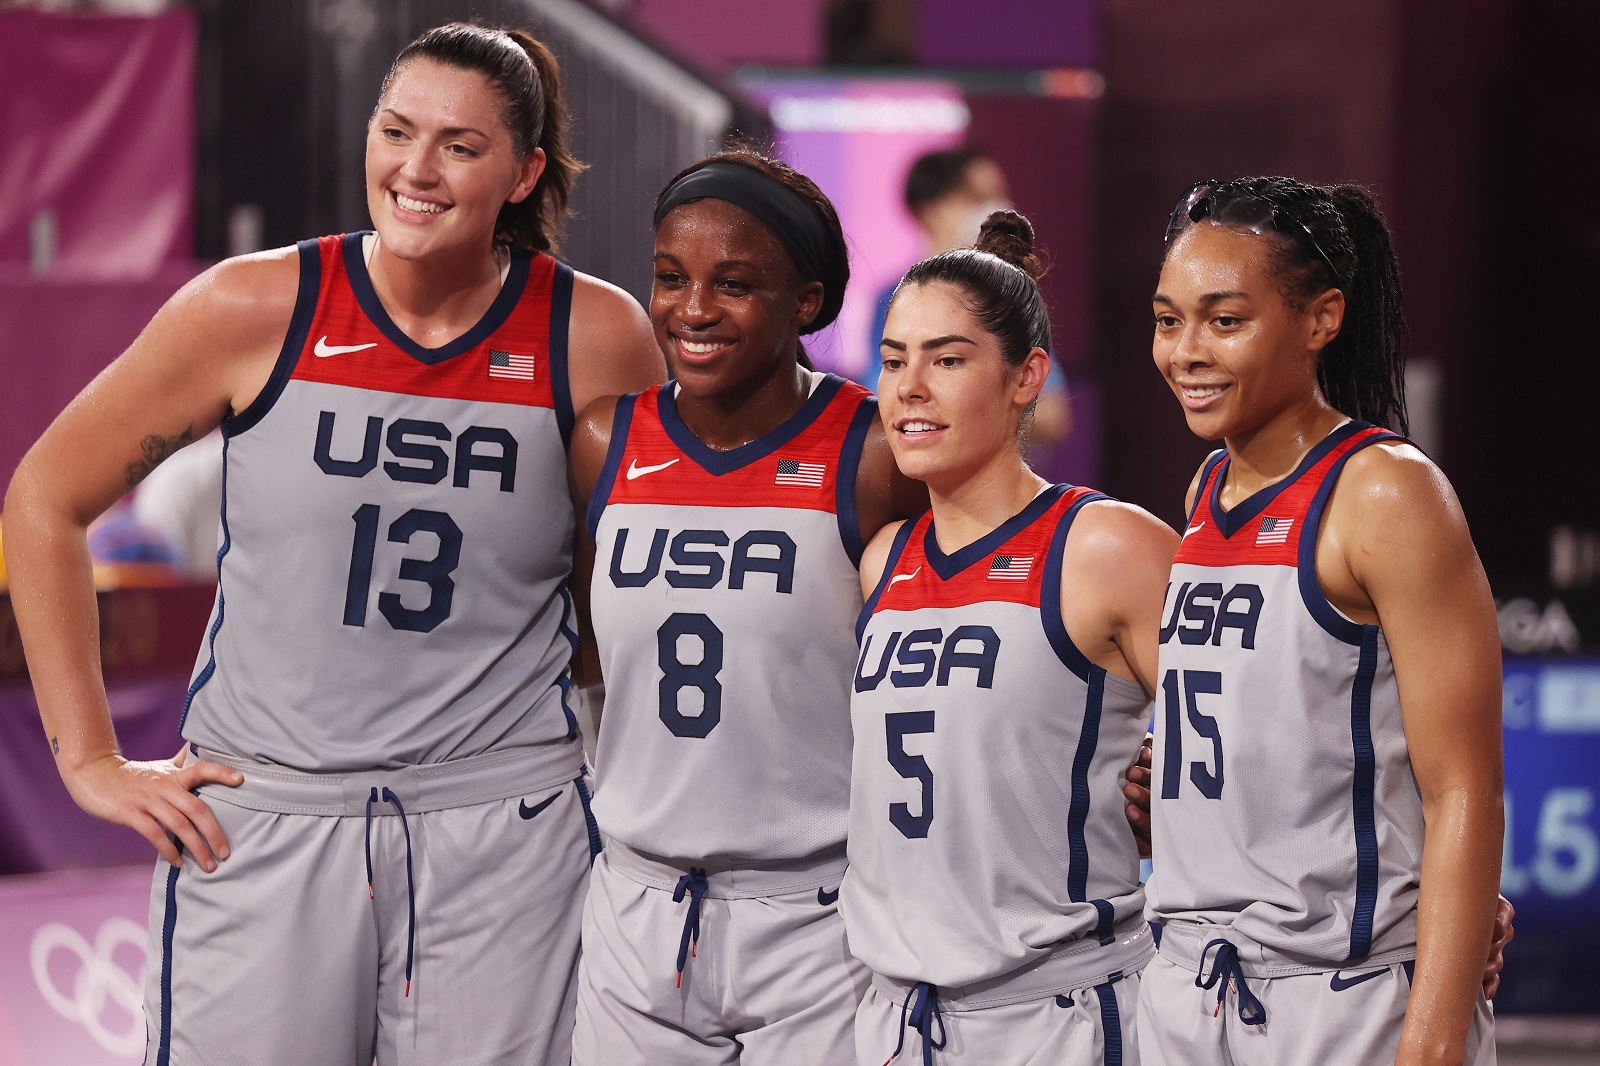 epa09374297 (L-R) Stefanie Dolson, Jackie Young, Kelsey Plum and Allisha Gray pose for a photograph after winning the Women's Gold Medal Game between the United States and Russia during the 3x3 Basketball events of the Tokyo 2020 Olympic Games at the Aomi Urban Sports Park in Tokyo, Japan, 28 July 2021.  EPA/FAZRY ISMAIL